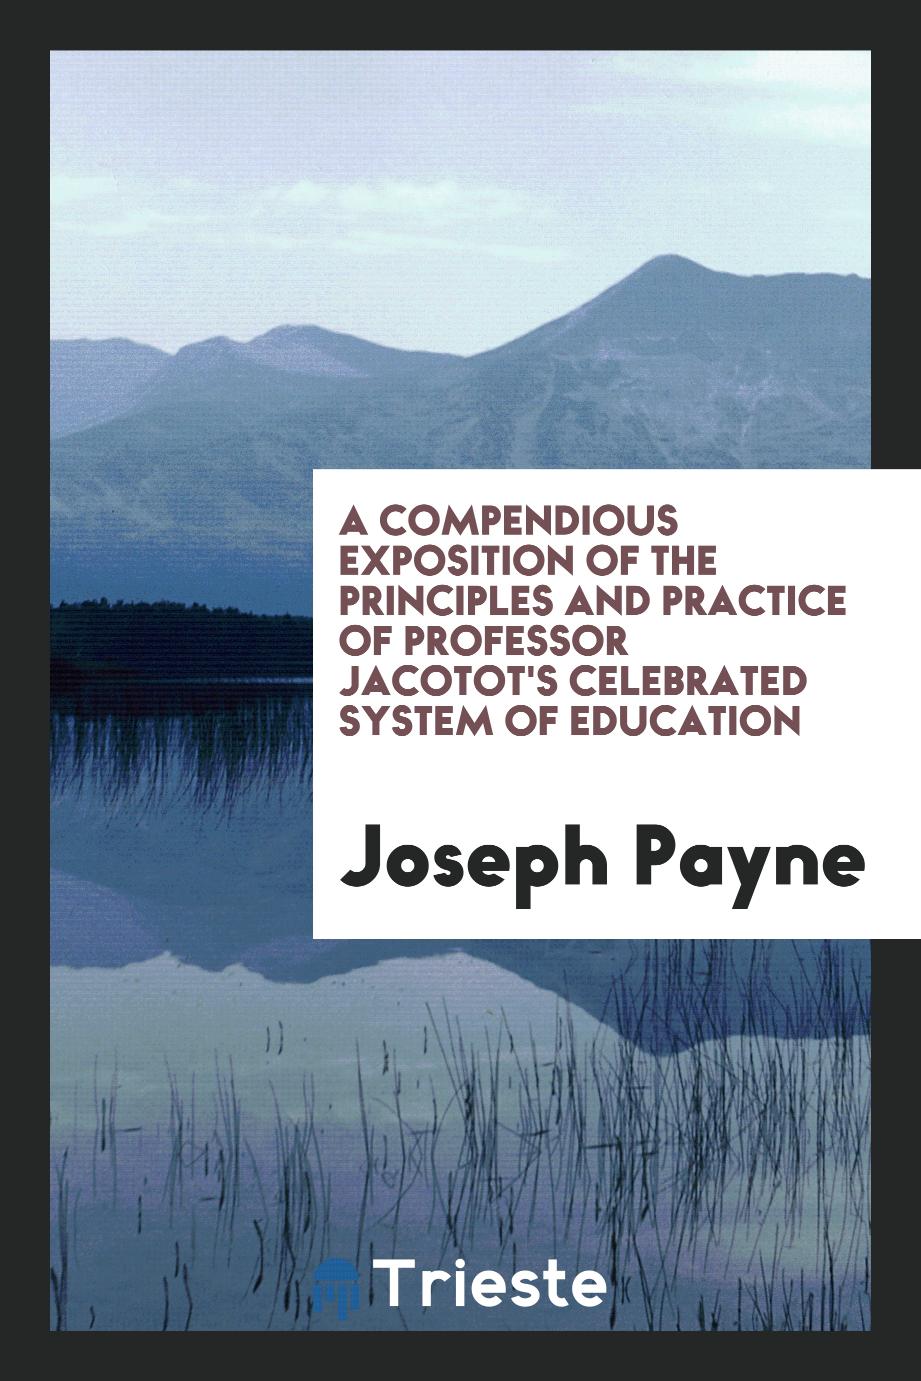 A Compendious Exposition of the Principles and Practice of Professor Jacotot's Celebrated System of education